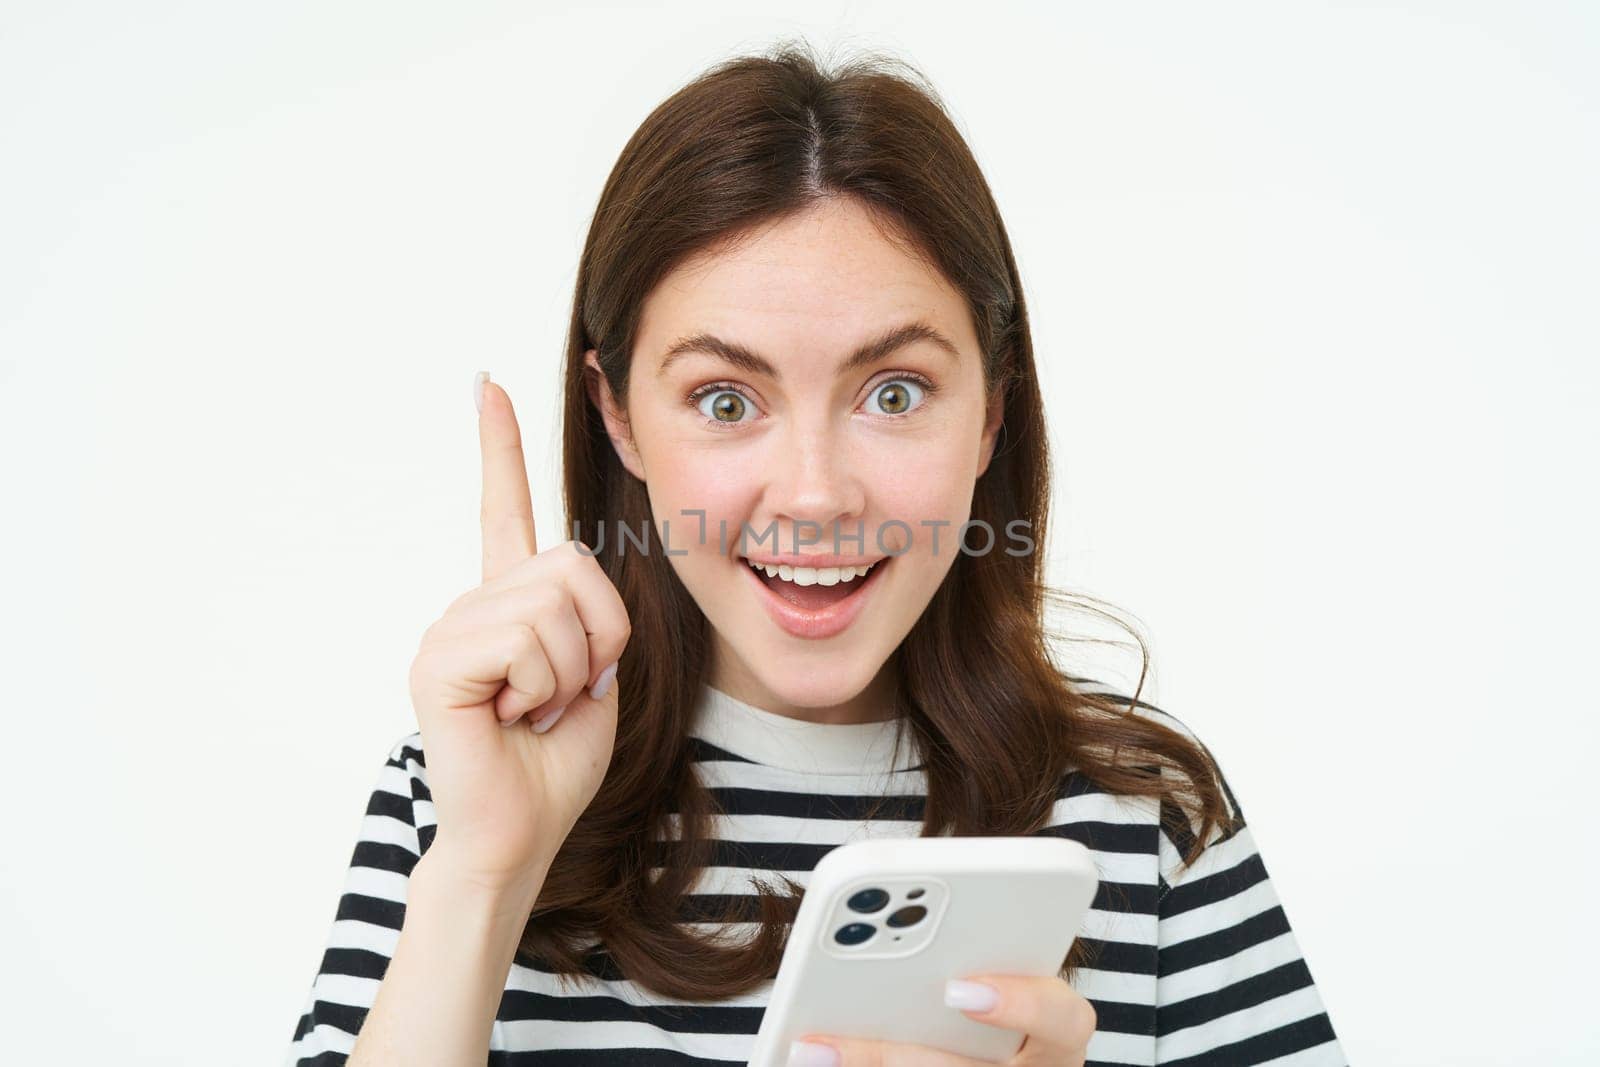 Got an idea. Smiling woman, raises her finger and holds smartphone, suggests something, makes eureka gesture, has a solution, white background.